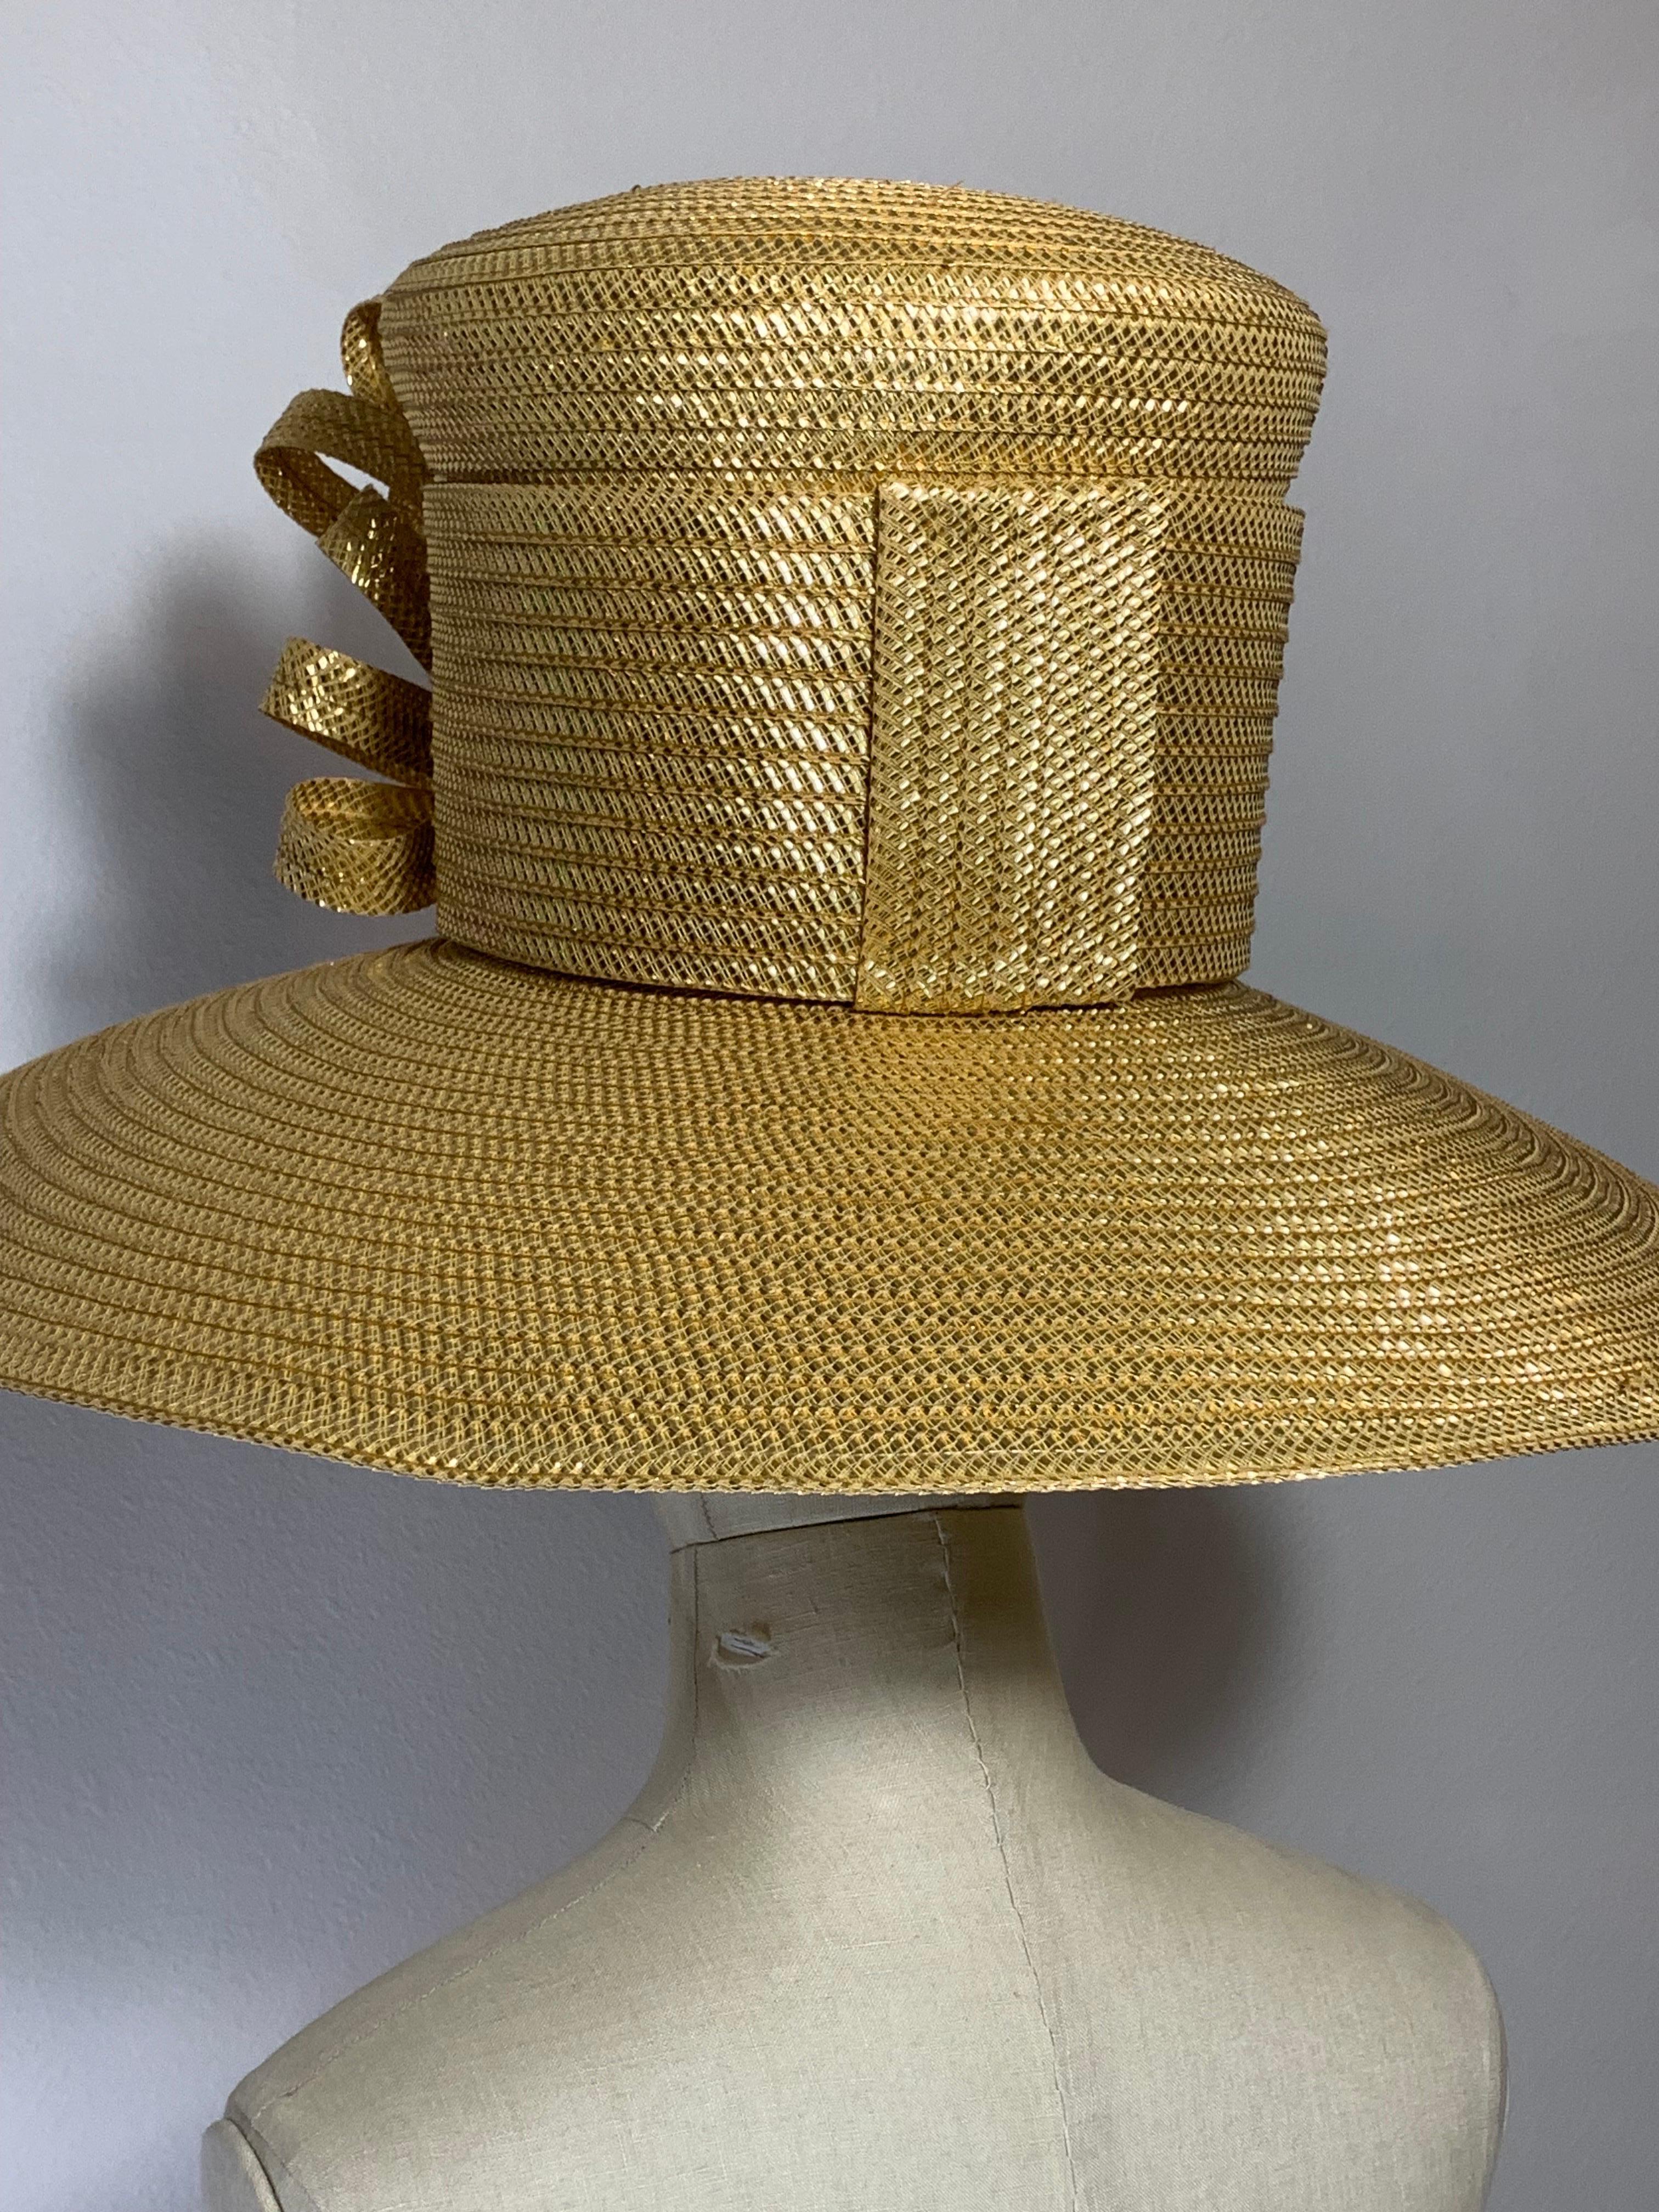 Custom Made Gleaming Gold Large Brimmed Straw Hat w High Crown & Straw Cockade For Sale 5